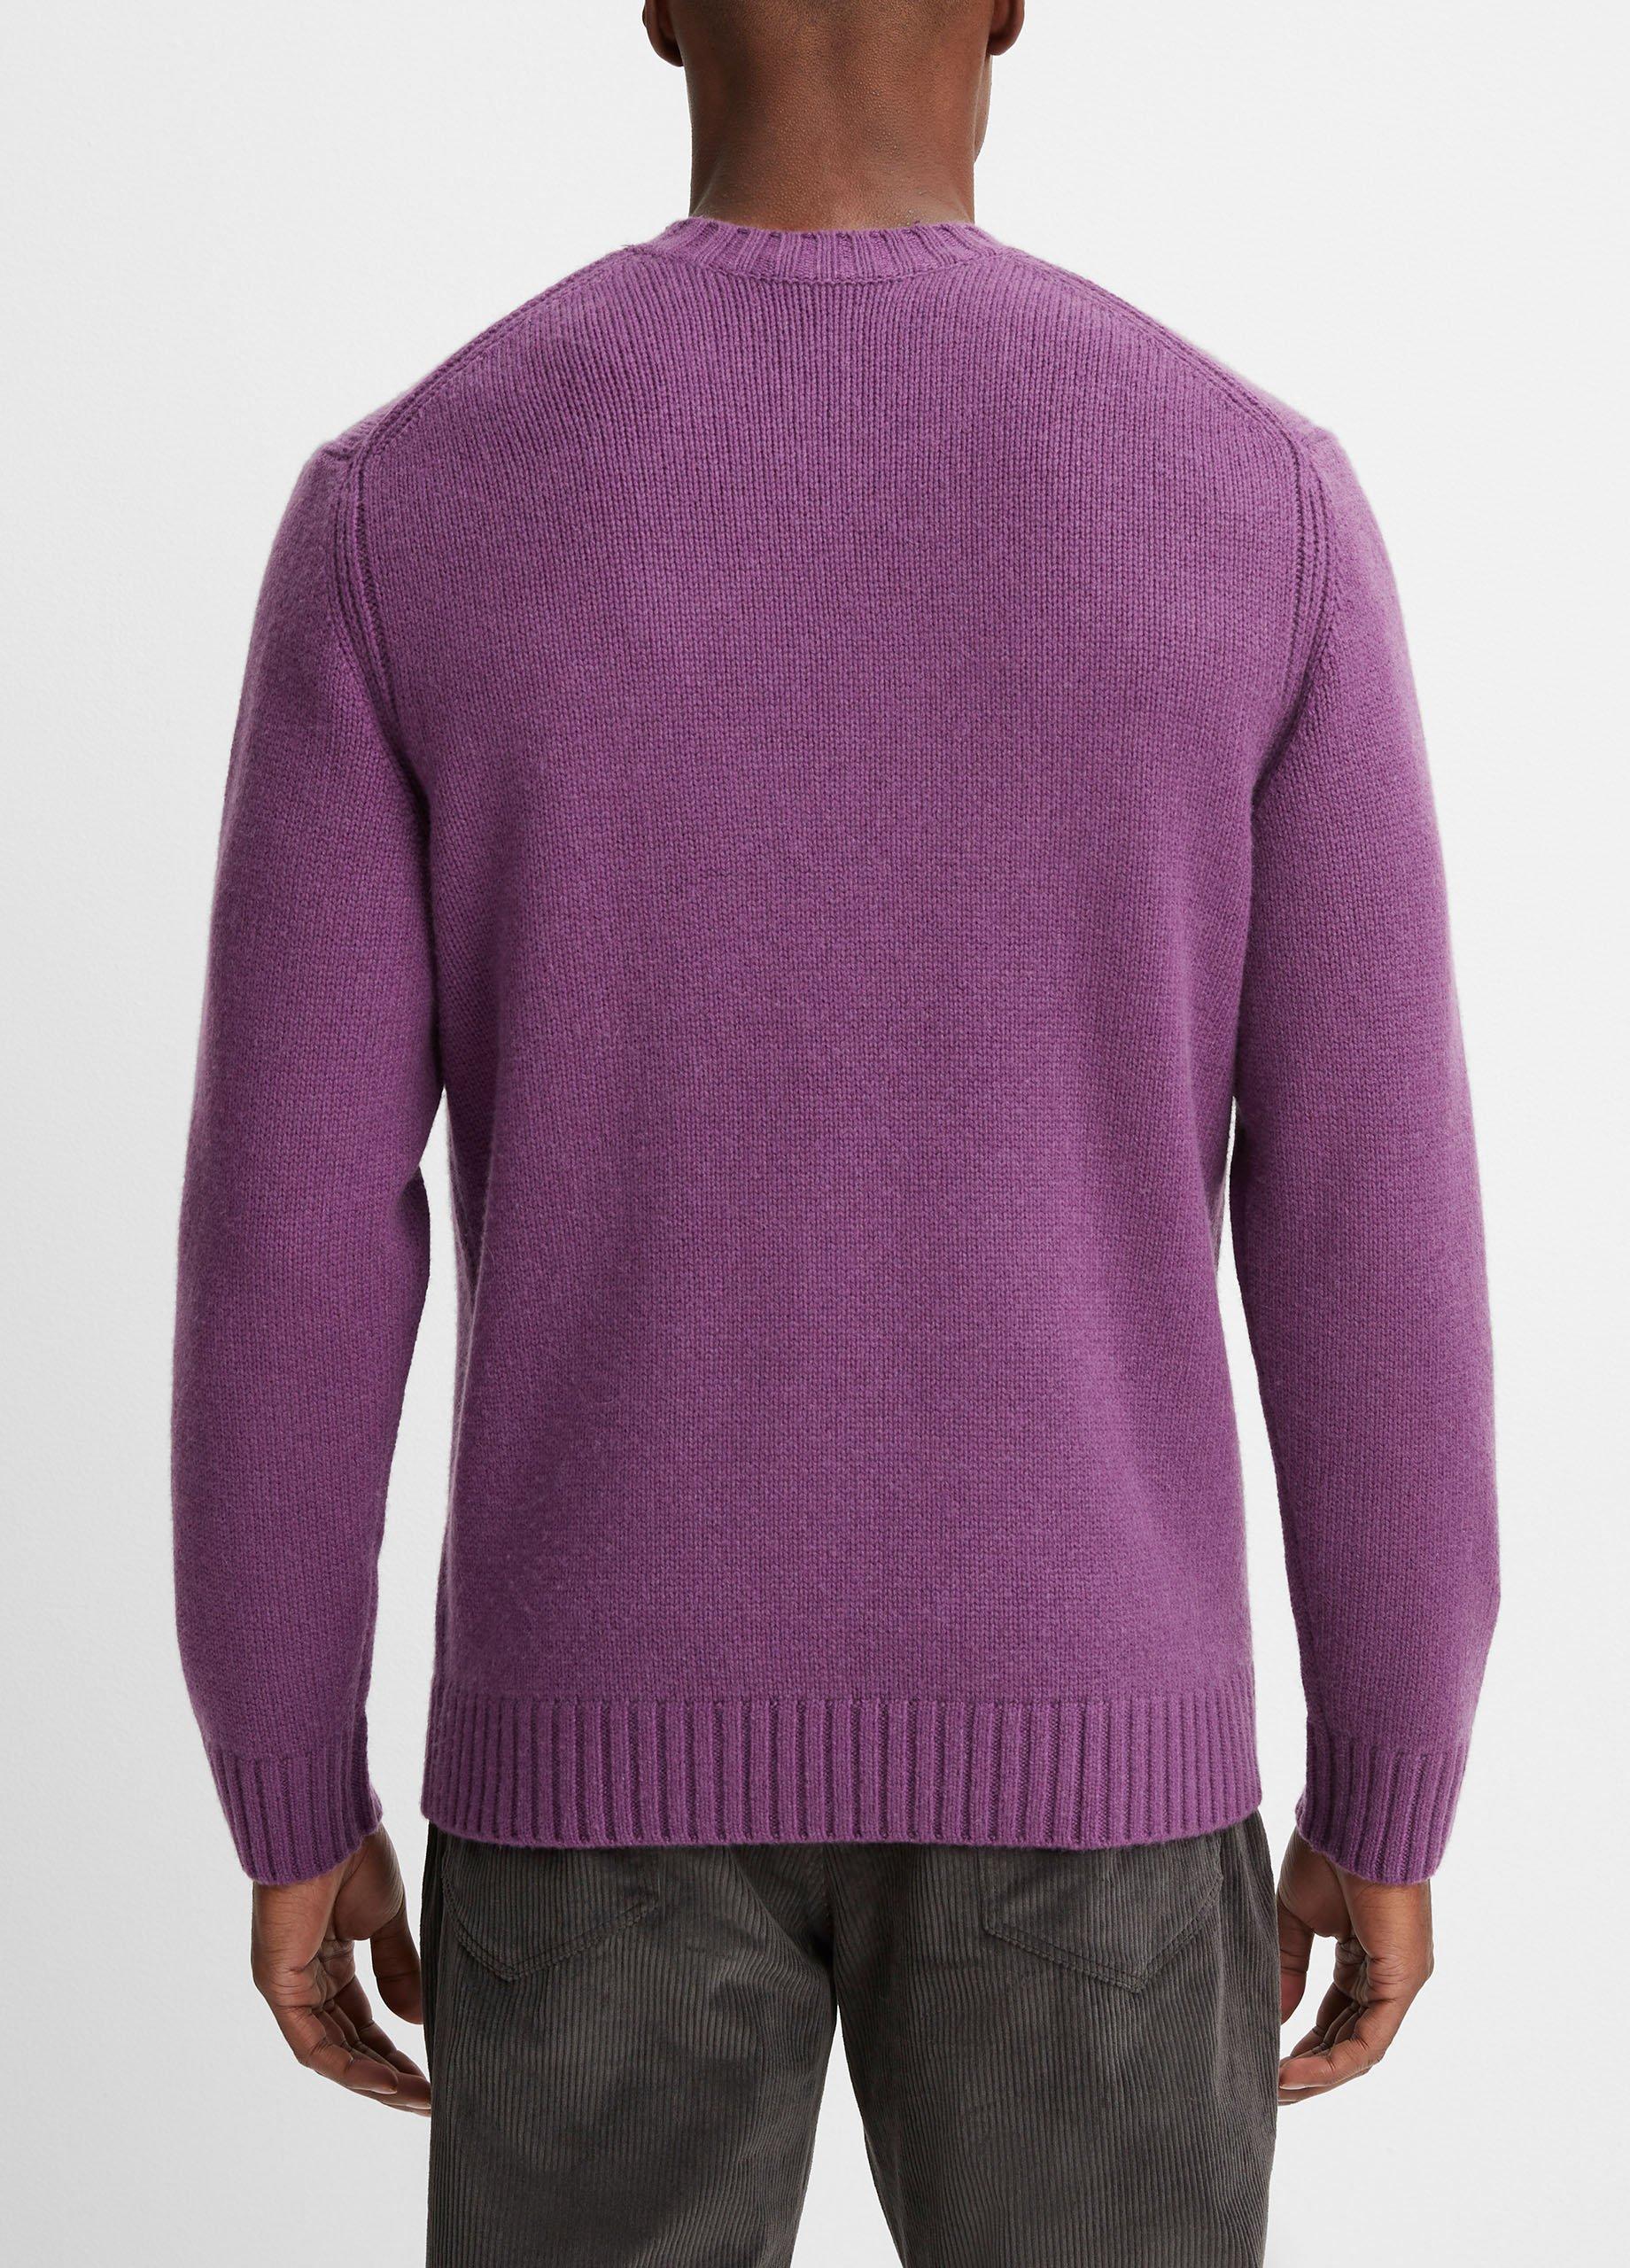 #39;BE CLASSIC#39; CASHMERE PULLOVER